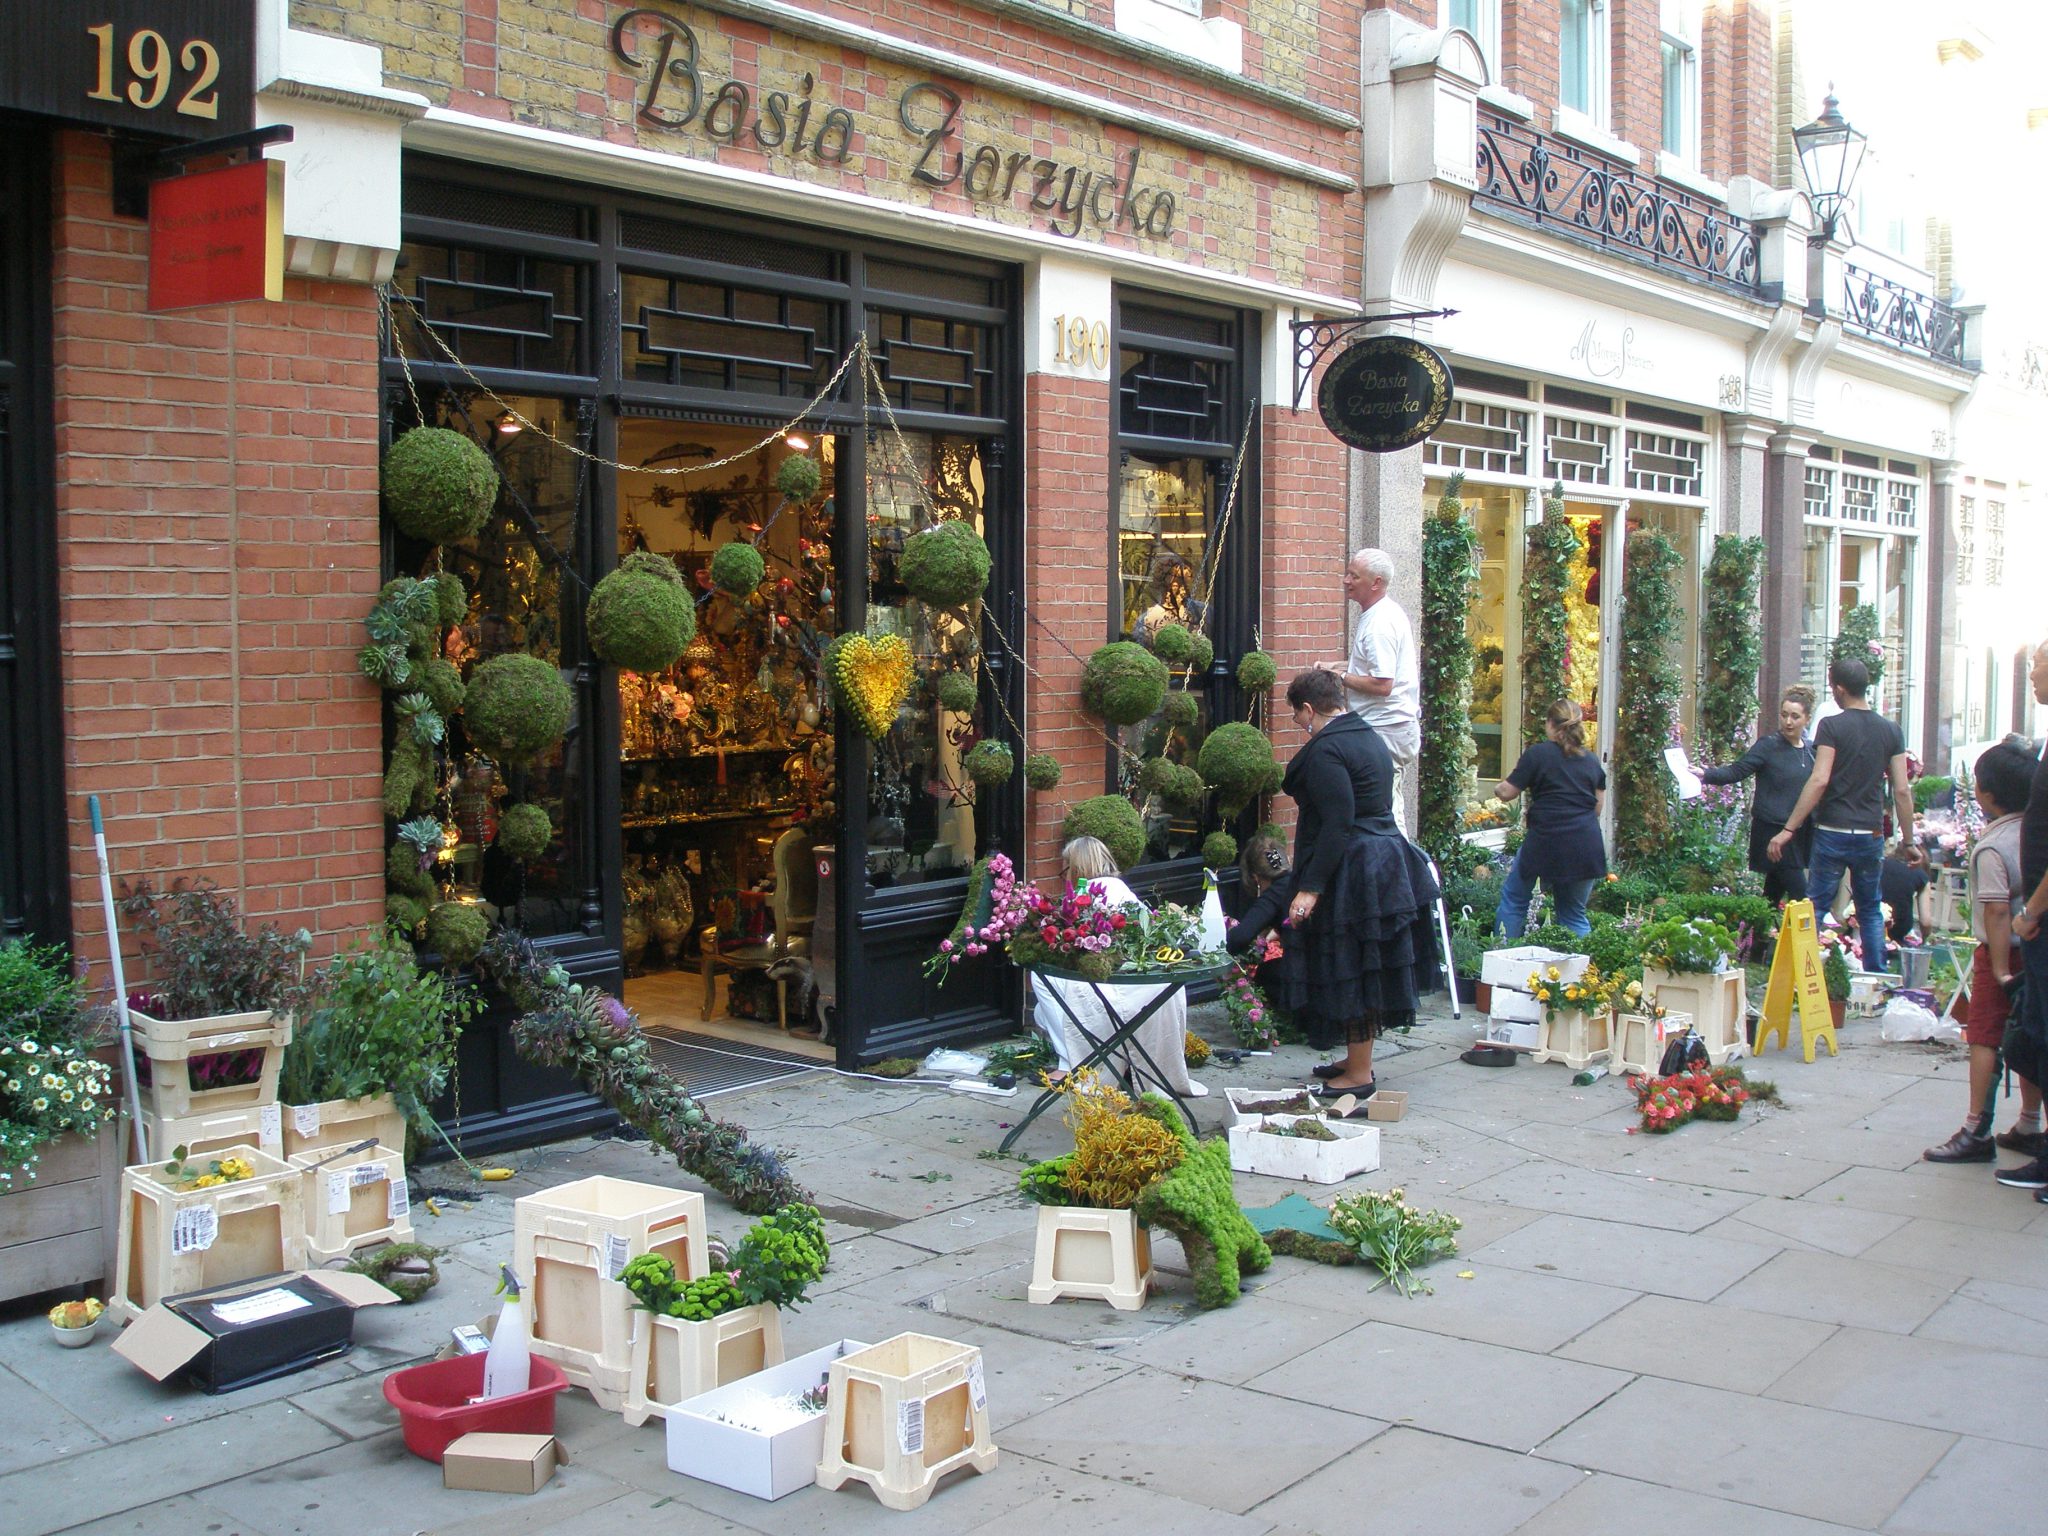 Chelsea in Bloom displays at Basia Zarzycka, and Moyses Stevens, are underway.